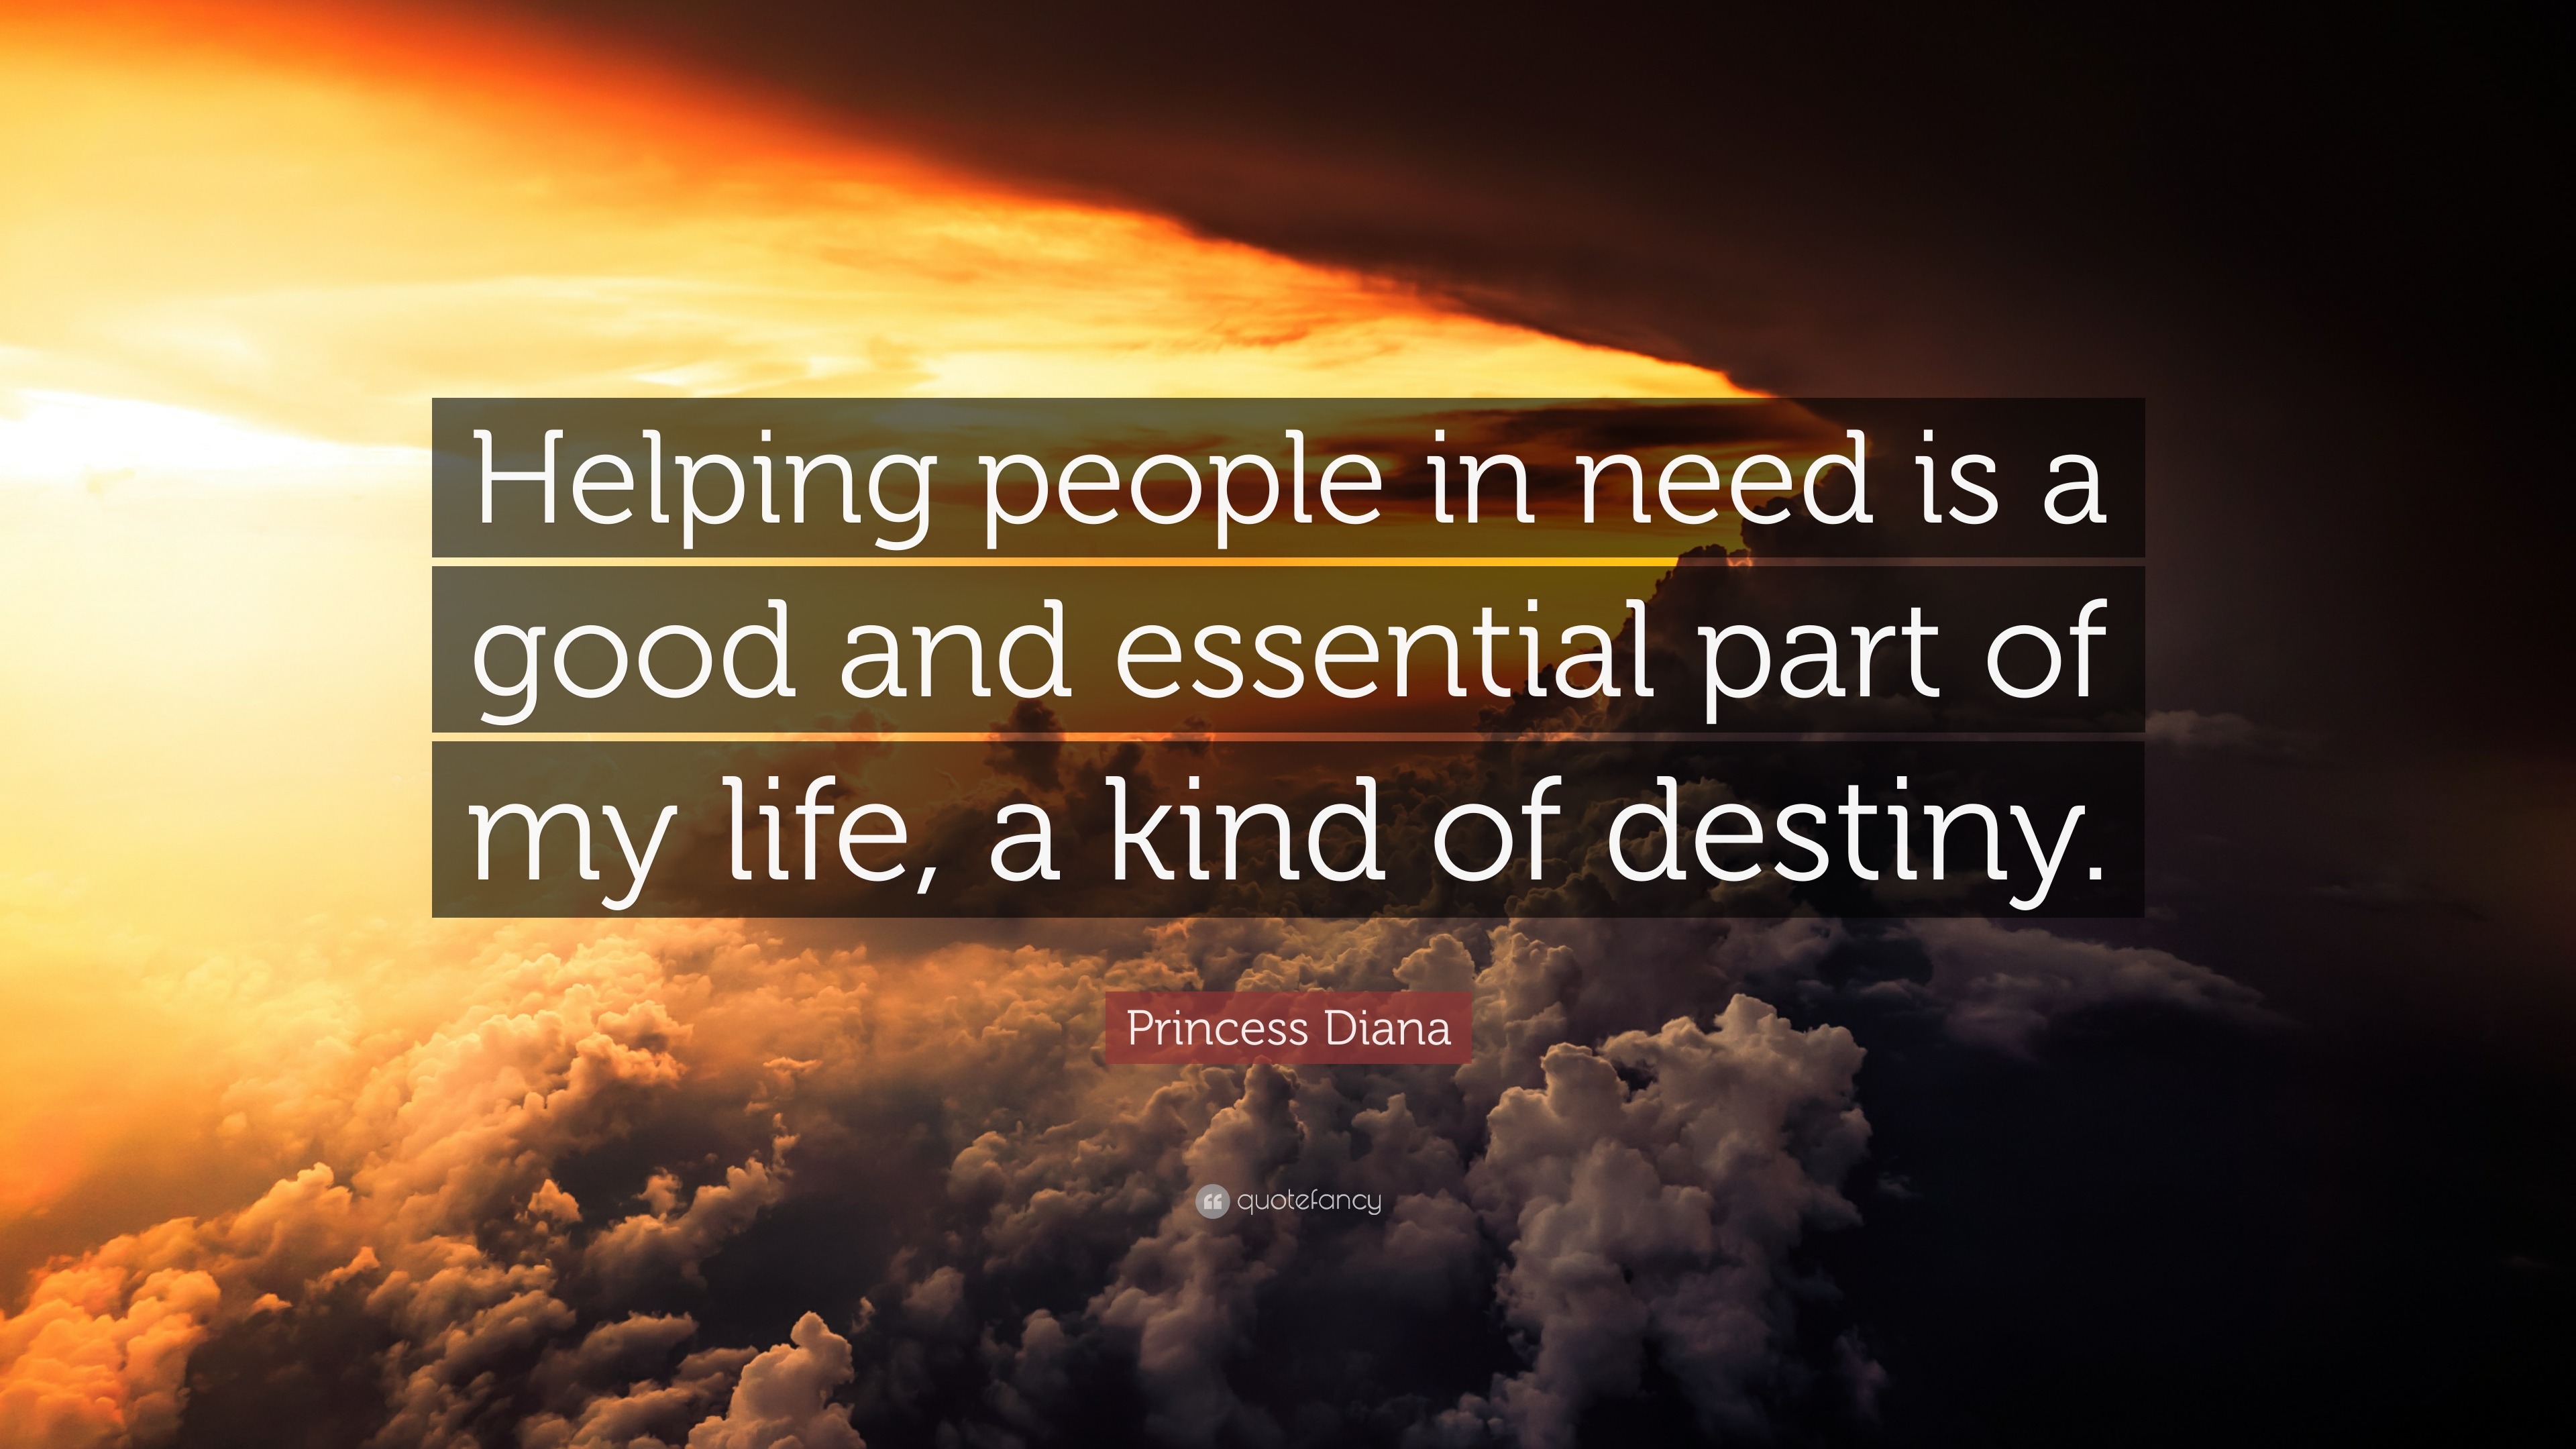 Princess Diana Quote: “Helping people in need is a good and essential